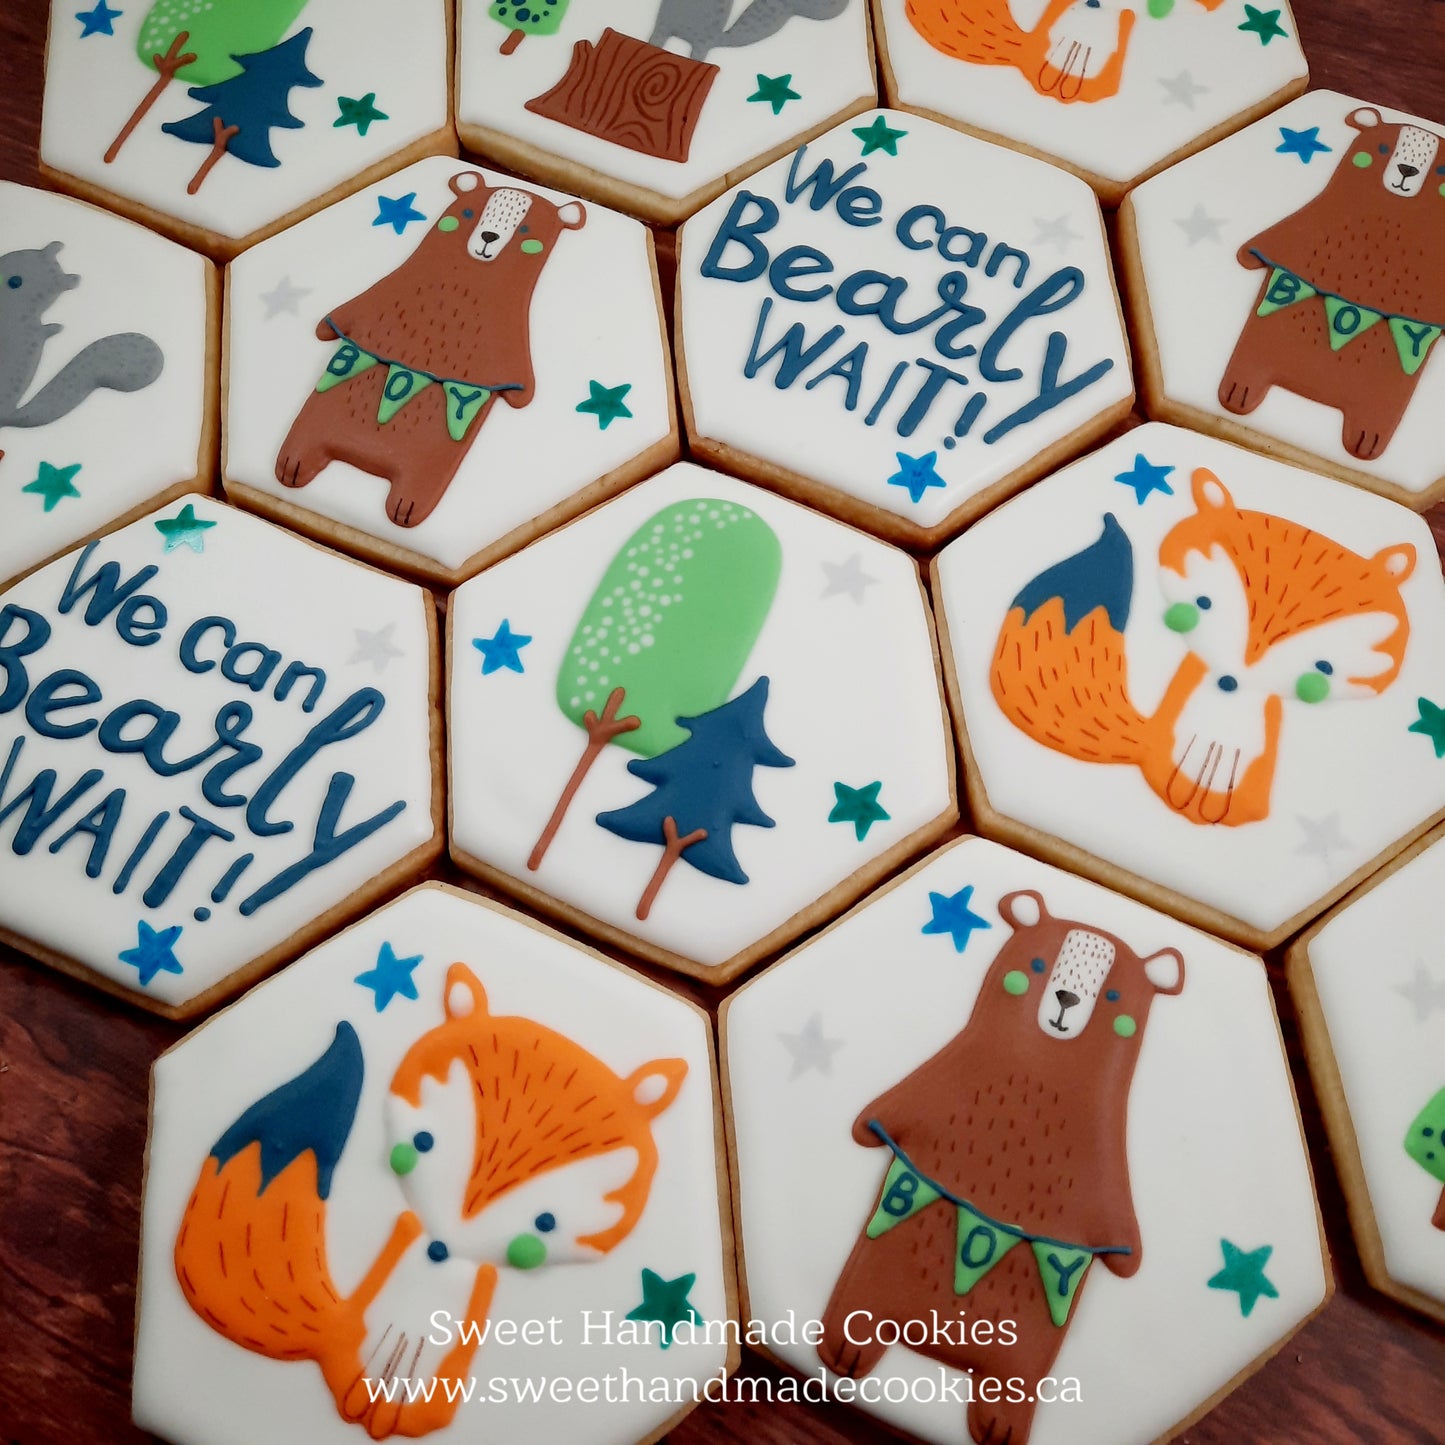 Baby Shower Cookies - We Can Bearly Wait